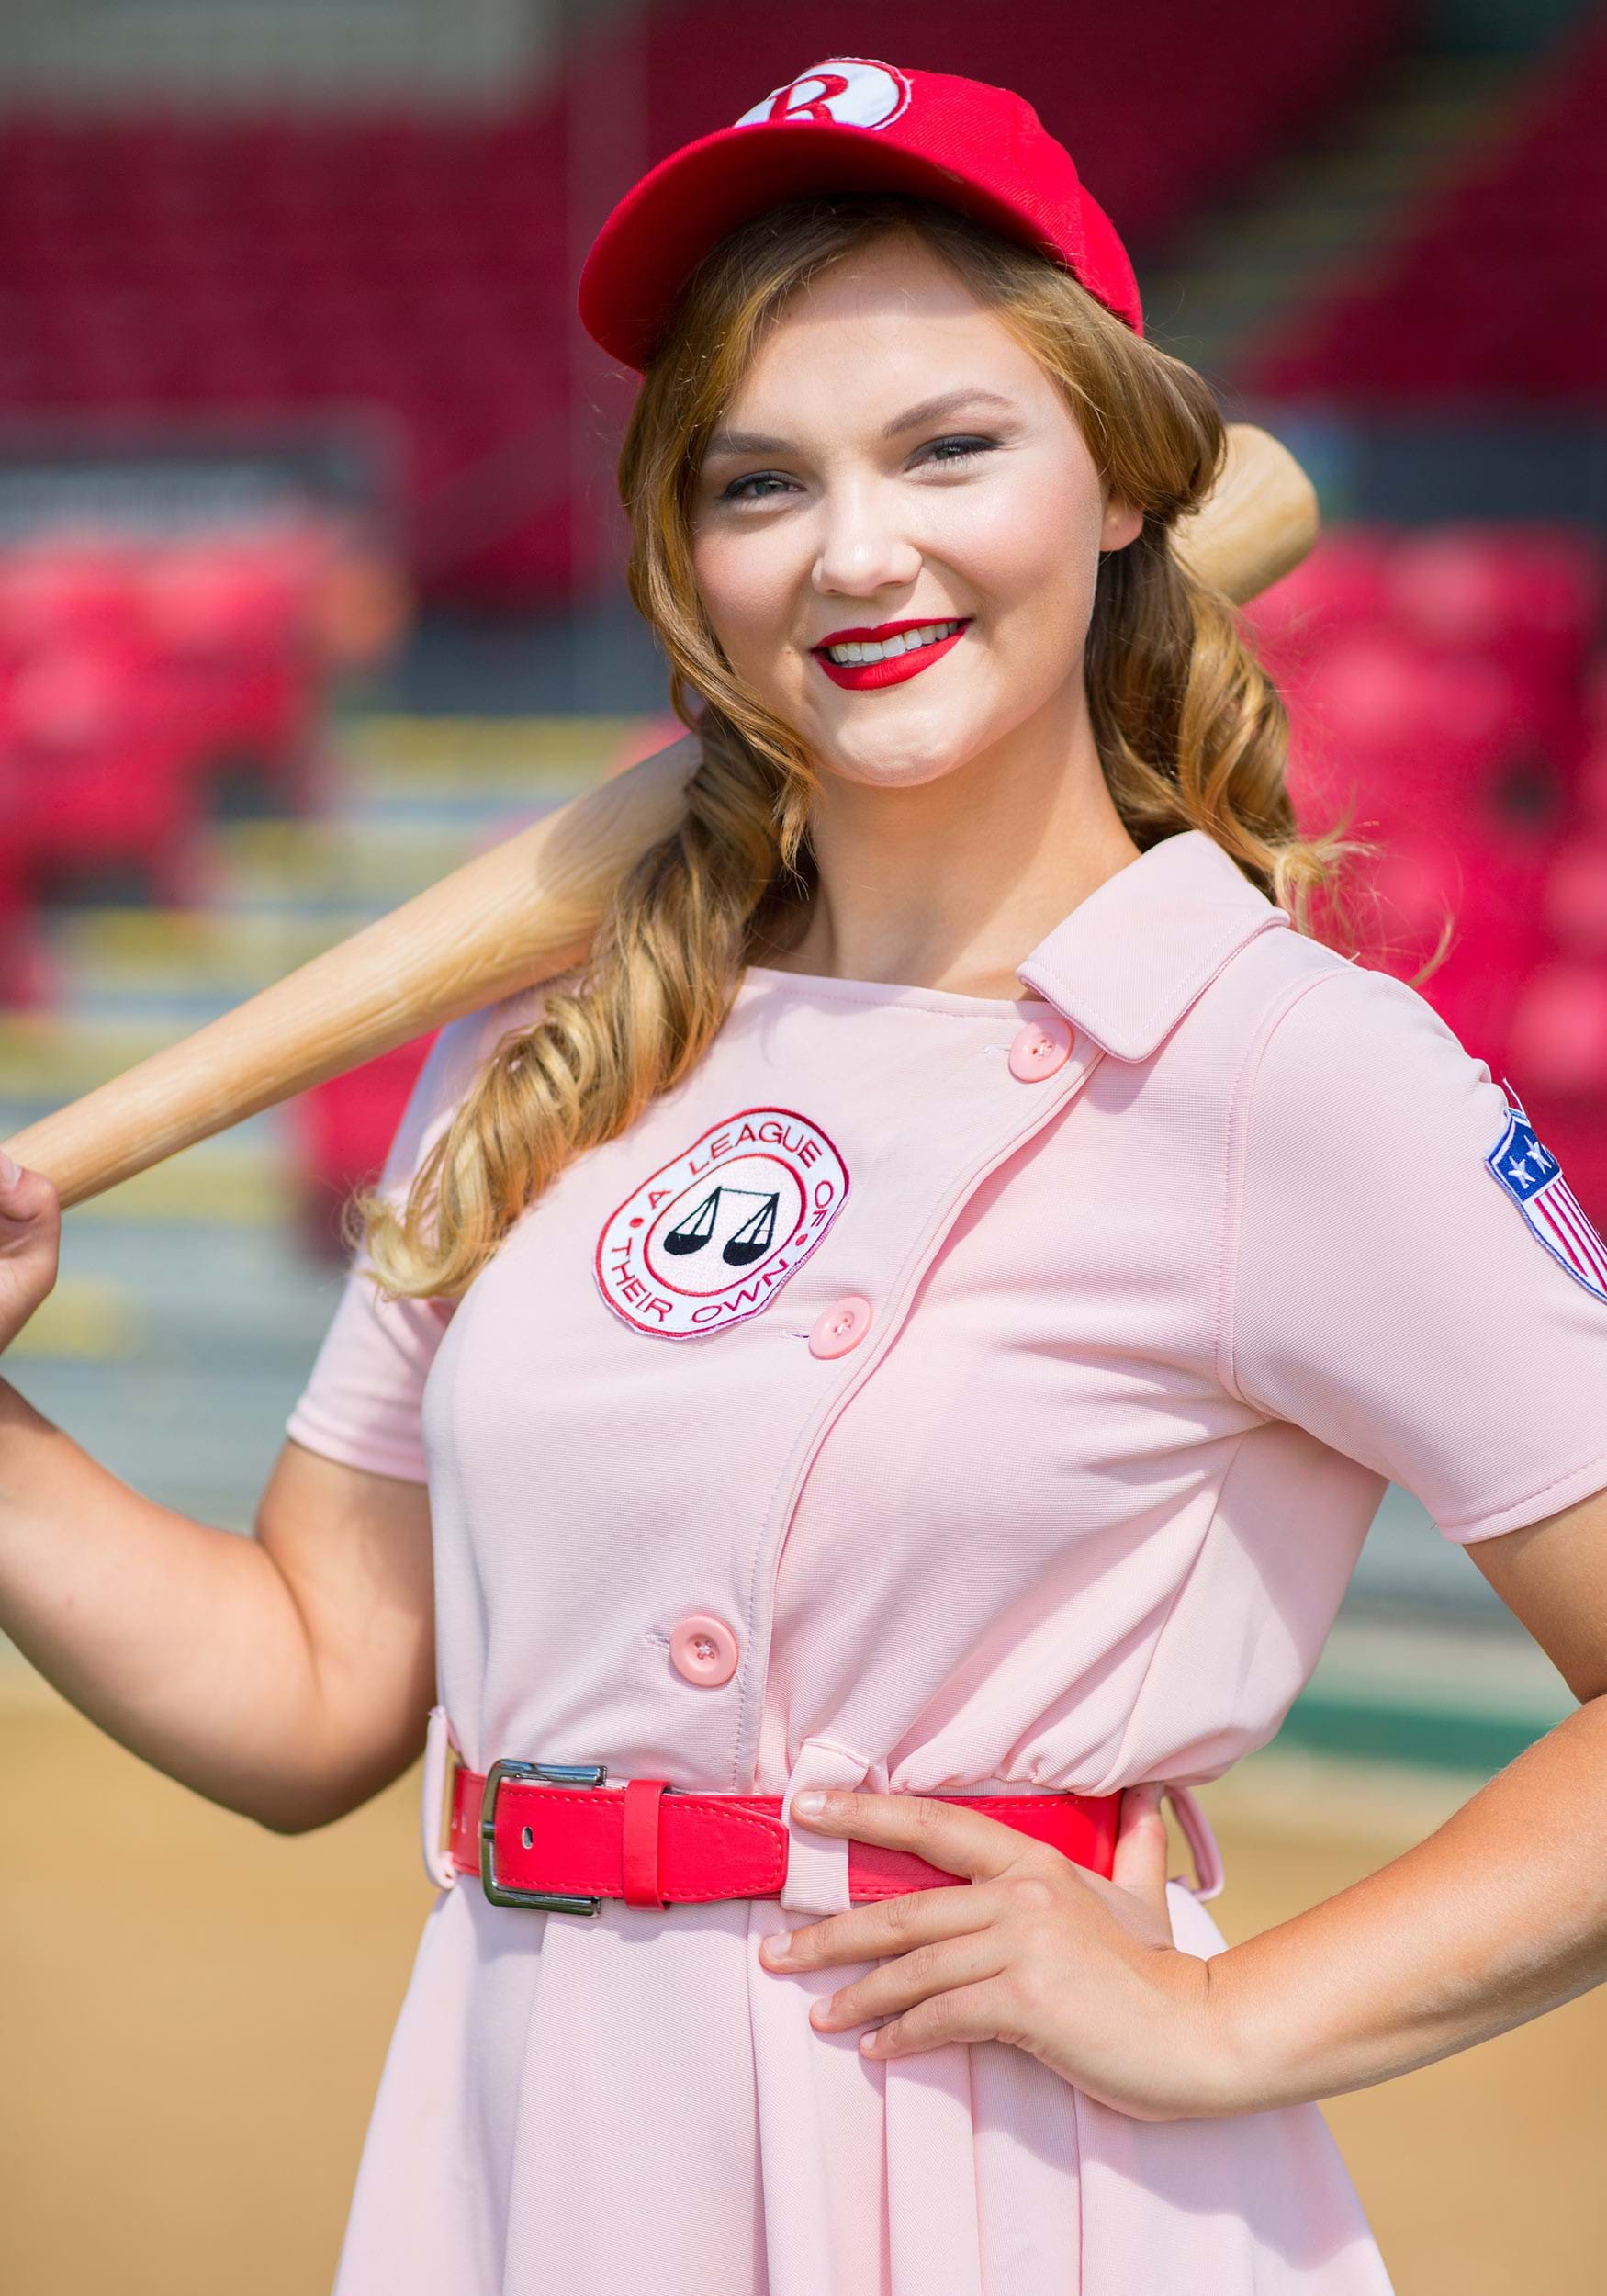 Women's Deluxe Dottie Costume From A League Of Their Own